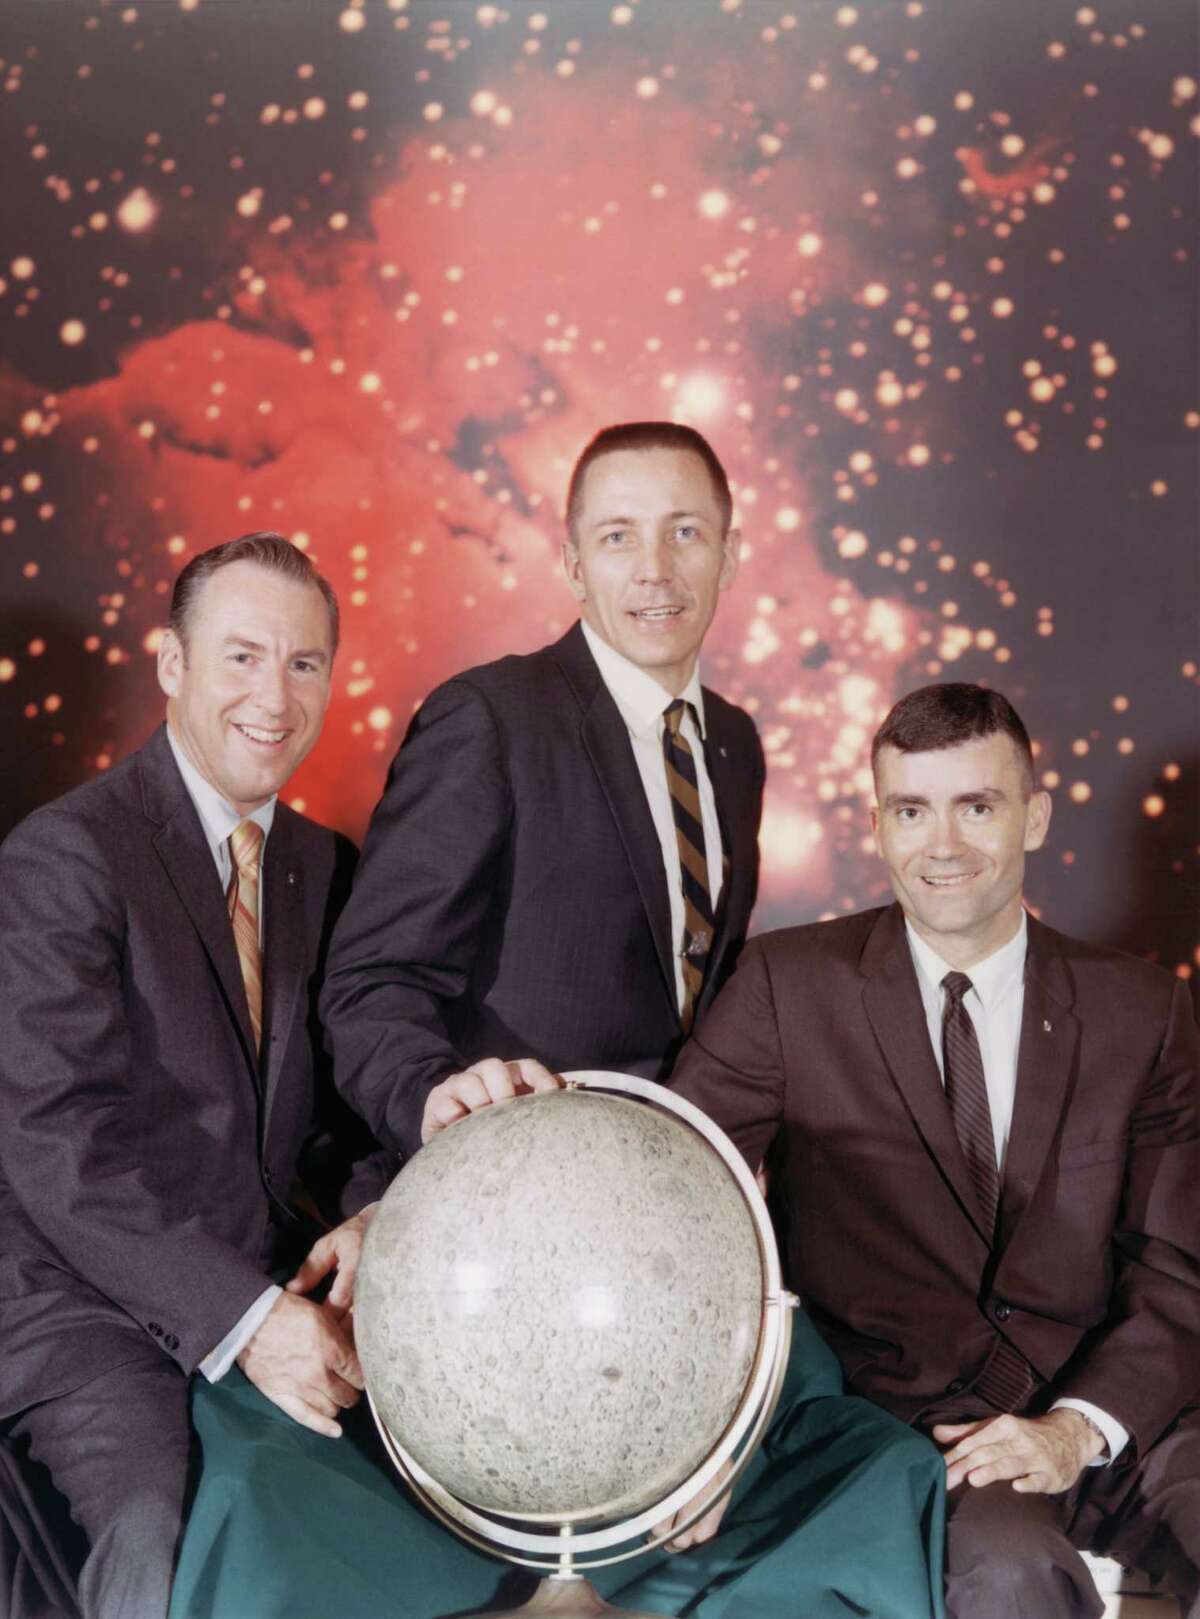 Here's the real-life Apollo 13 crew taken shortly before liftoff: from left to right, Commander James A. Lovell Jr., Command Module pilot John L. Swigert, Jr. and Lunar Module pilot Fred W. Haise, Jr., April 1970. The mission was launched on April 11th, 1970, but the crew were forced to return to earth without ever having reached the moon, following an onboard explosion.